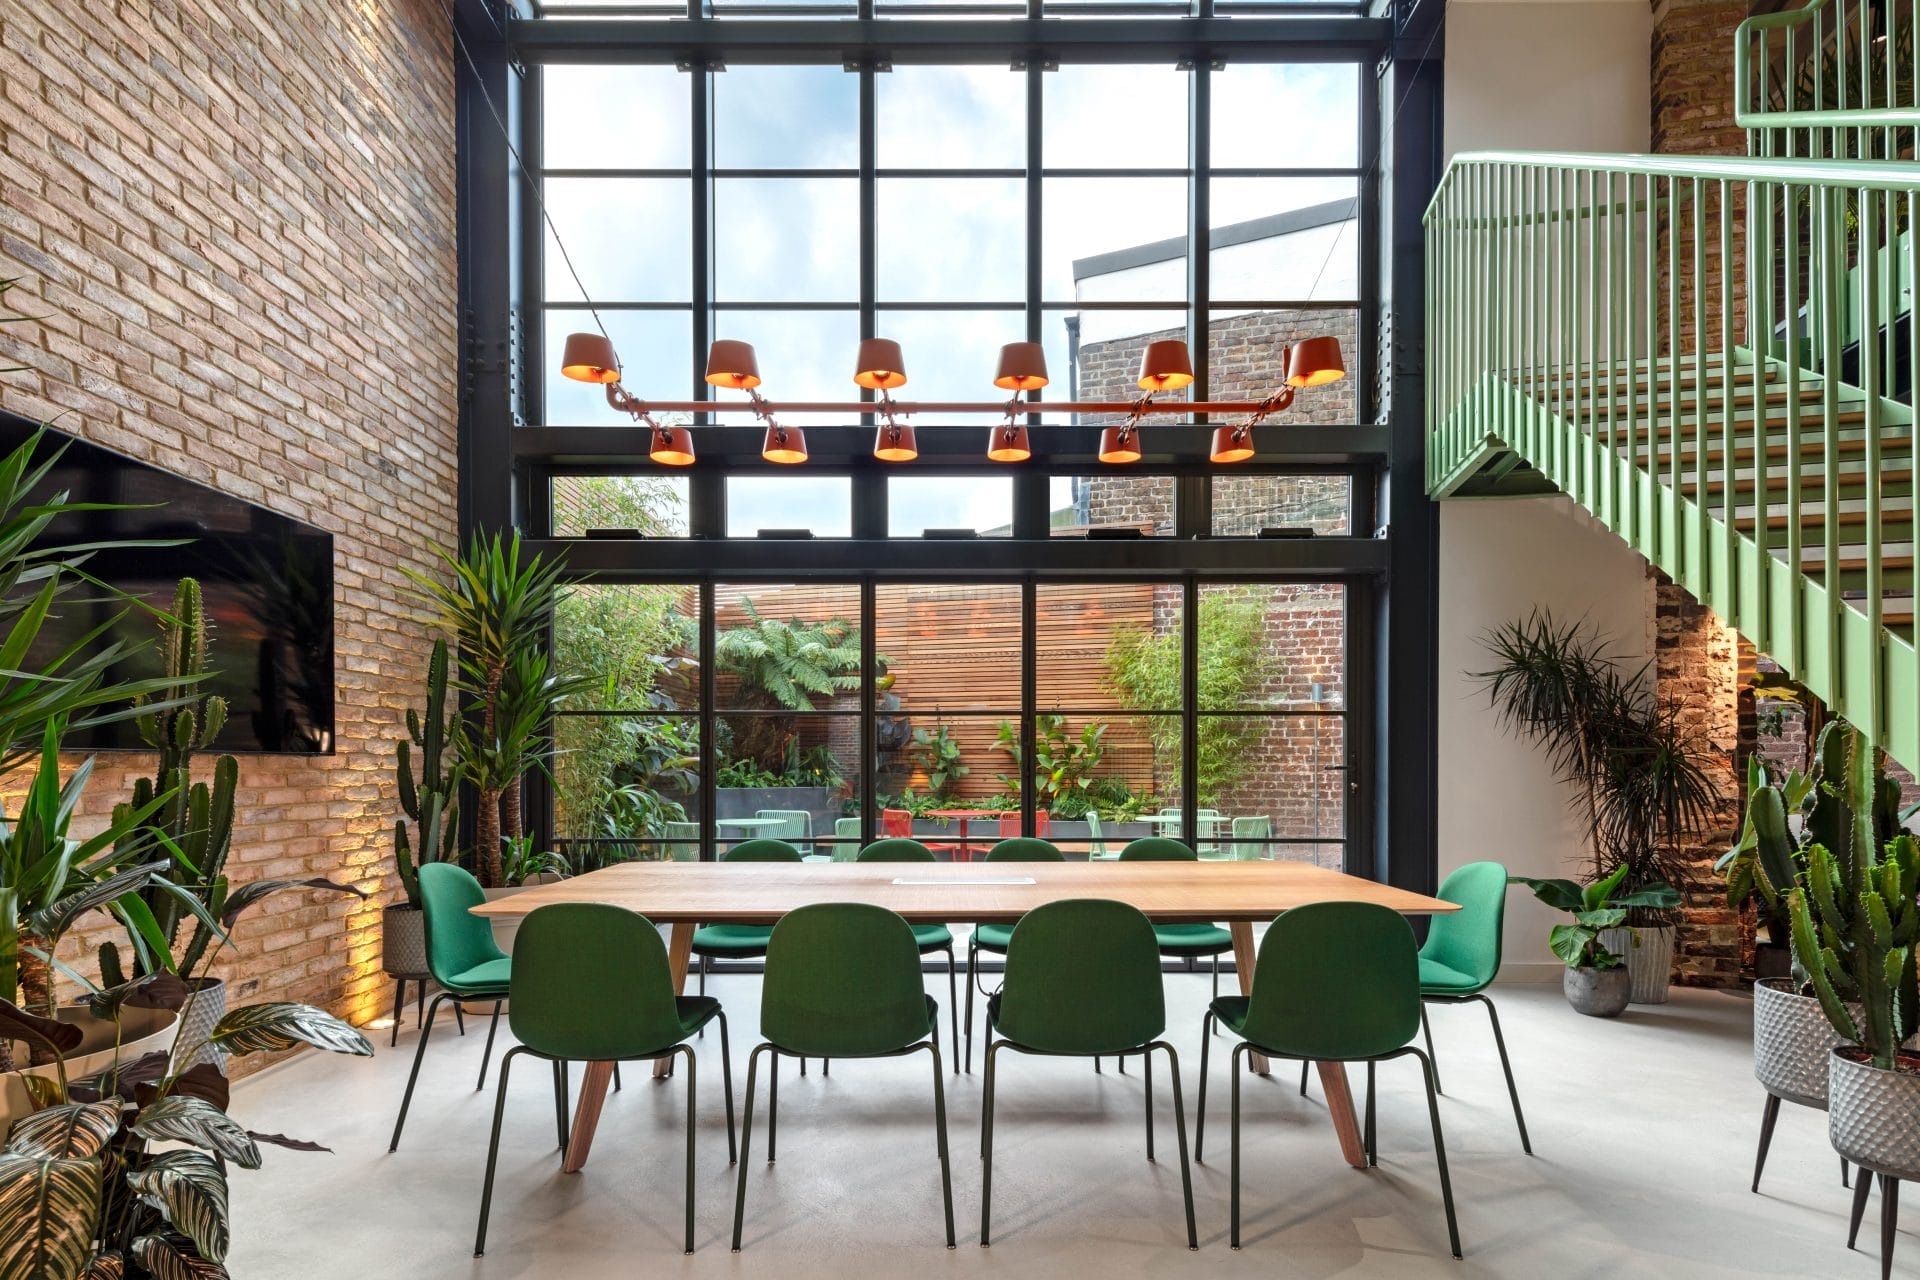 Interior design of a commercial office space in Brighton featuring green chairs and a table. Stickland Wright Architecture and Interior Design